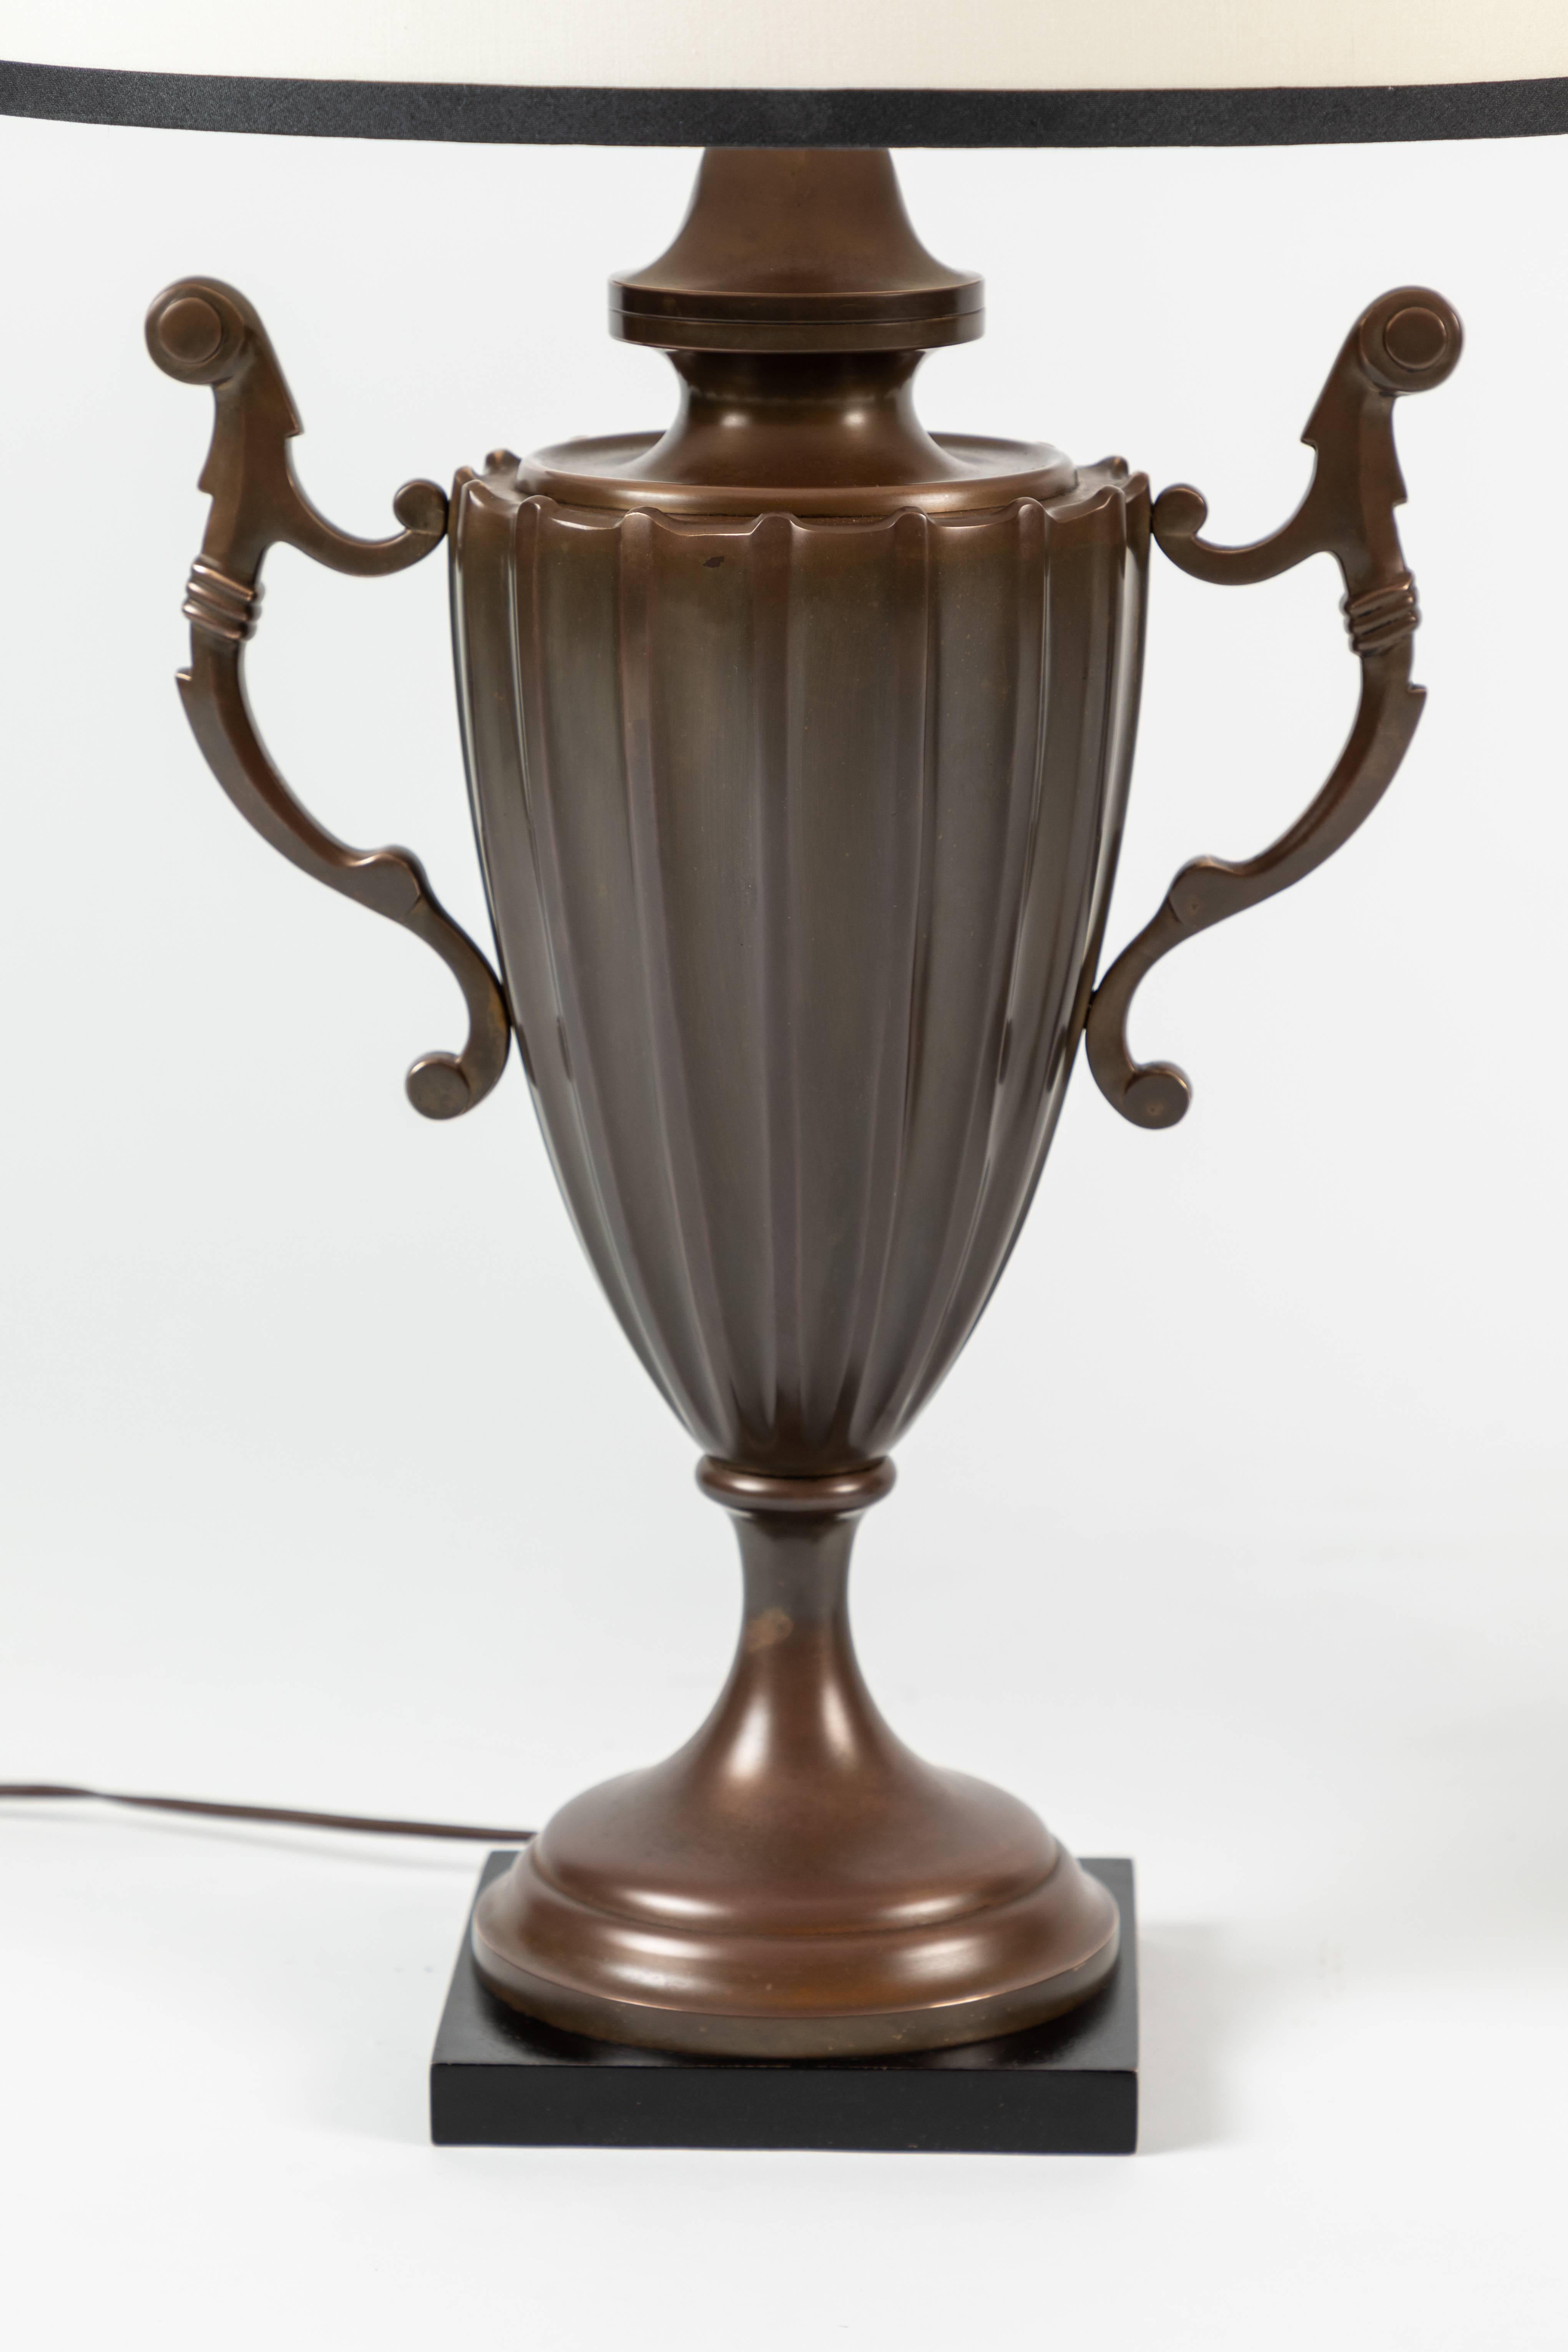 Manufactured by Chapman Manufacturing Company, these table lamps resembles a fluted English urn (or an Accolade cup trophy) made from solid brass. 

The shades are newly designed, and custom made.